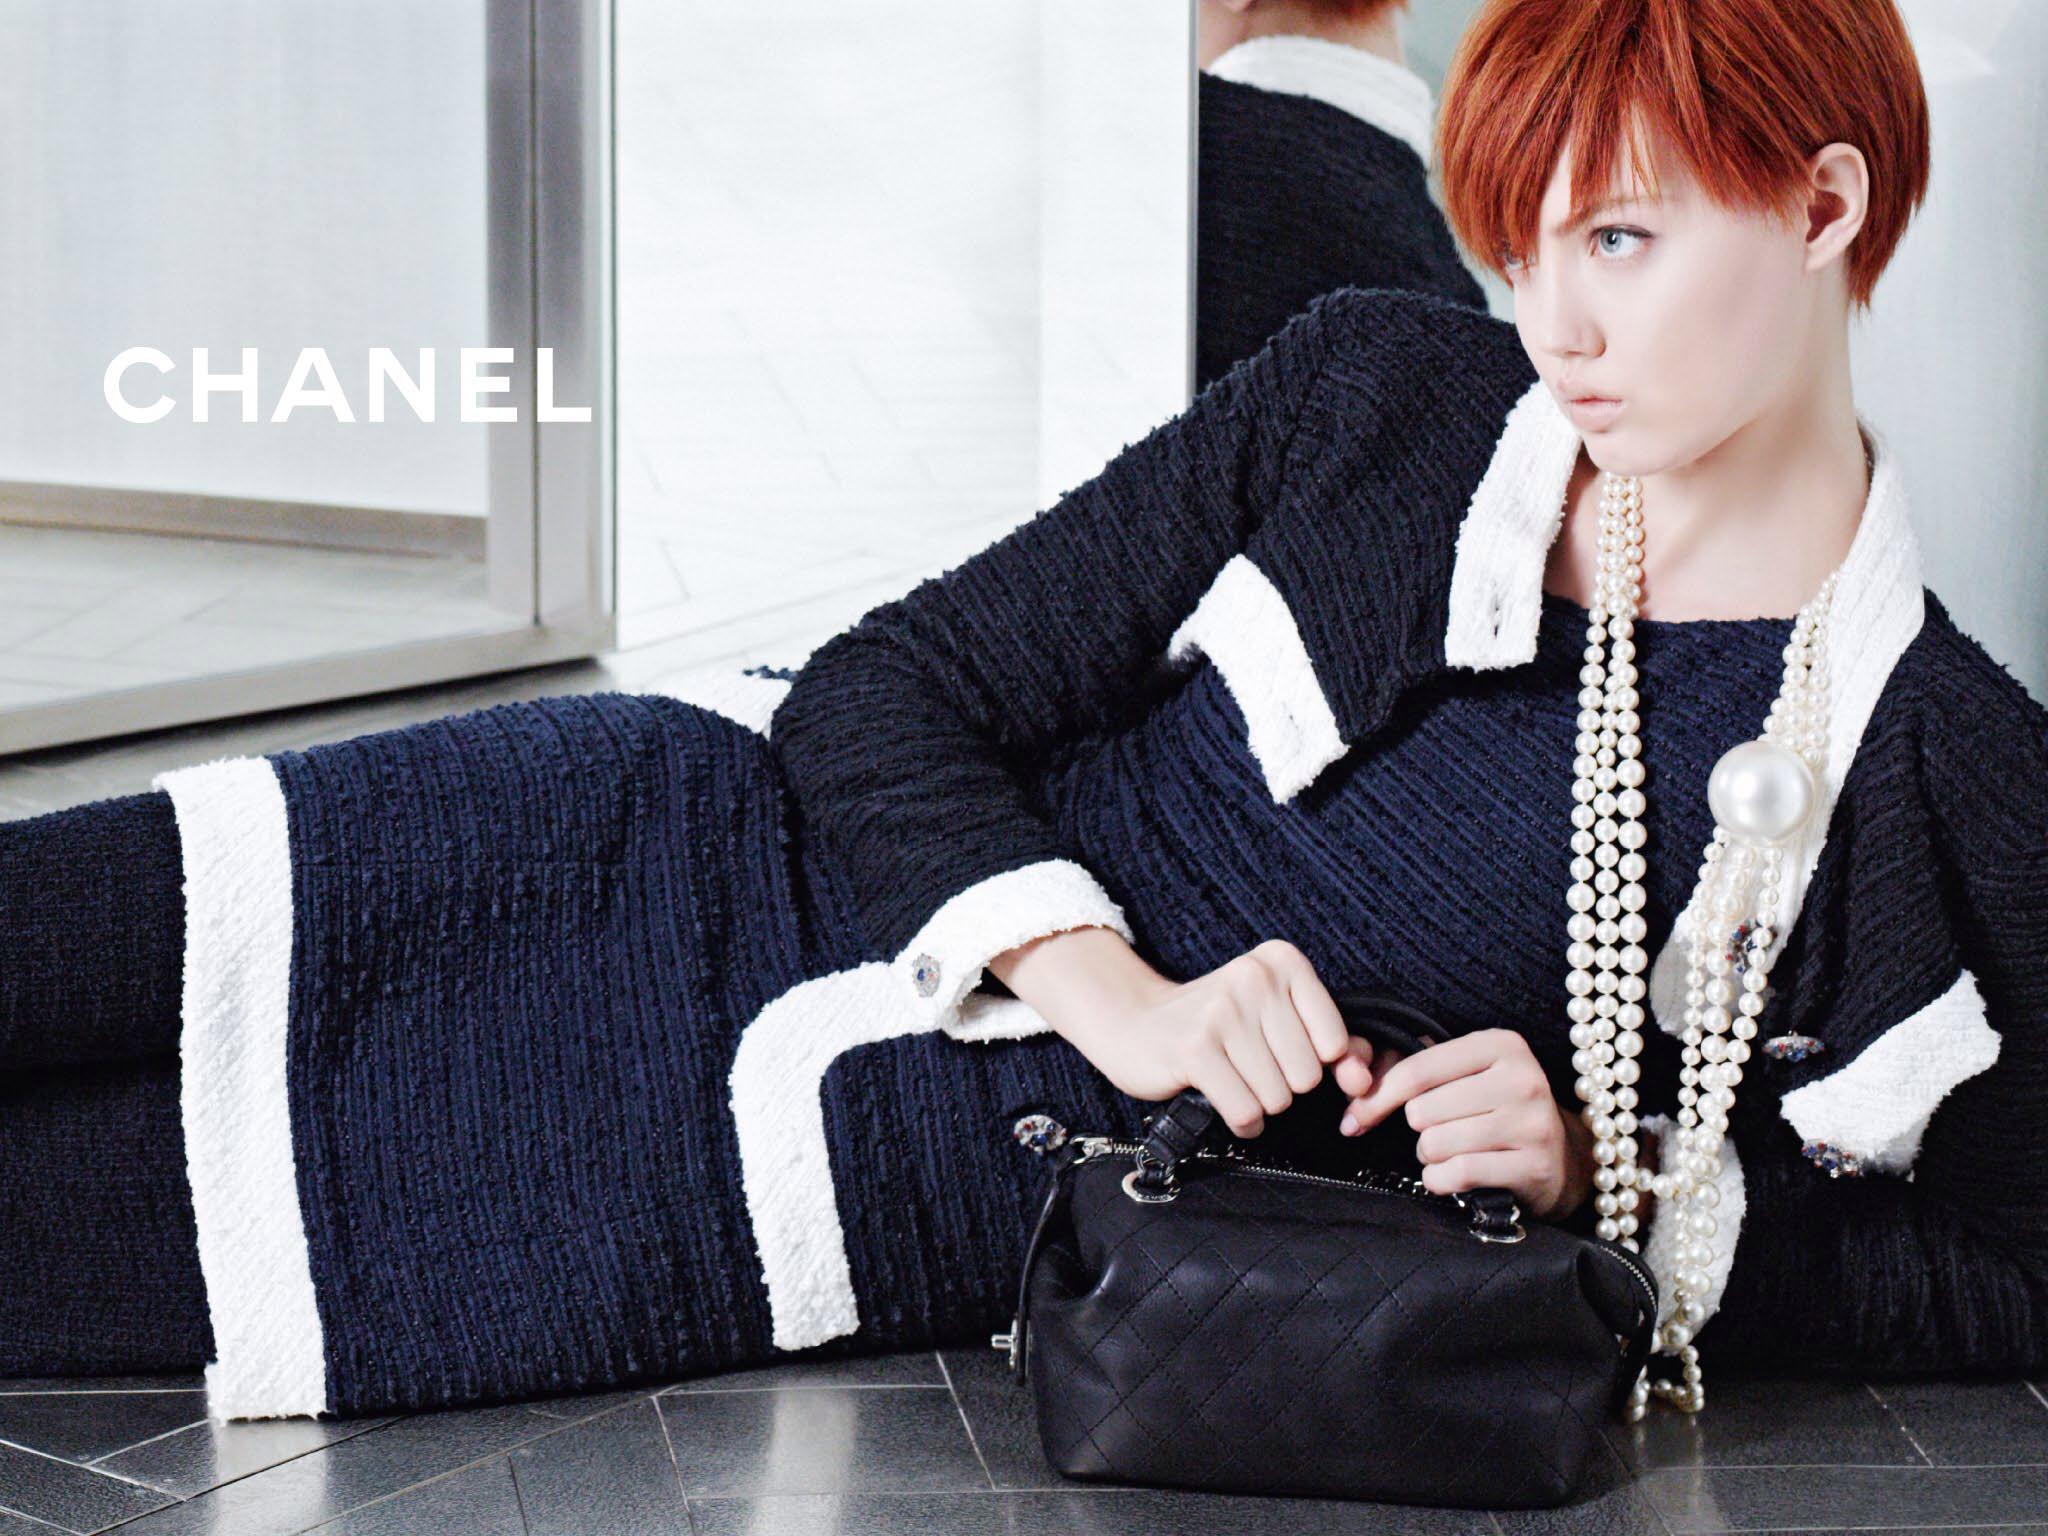 Chanel Spring Summer 2014 Ad Campaign - More Photos 3